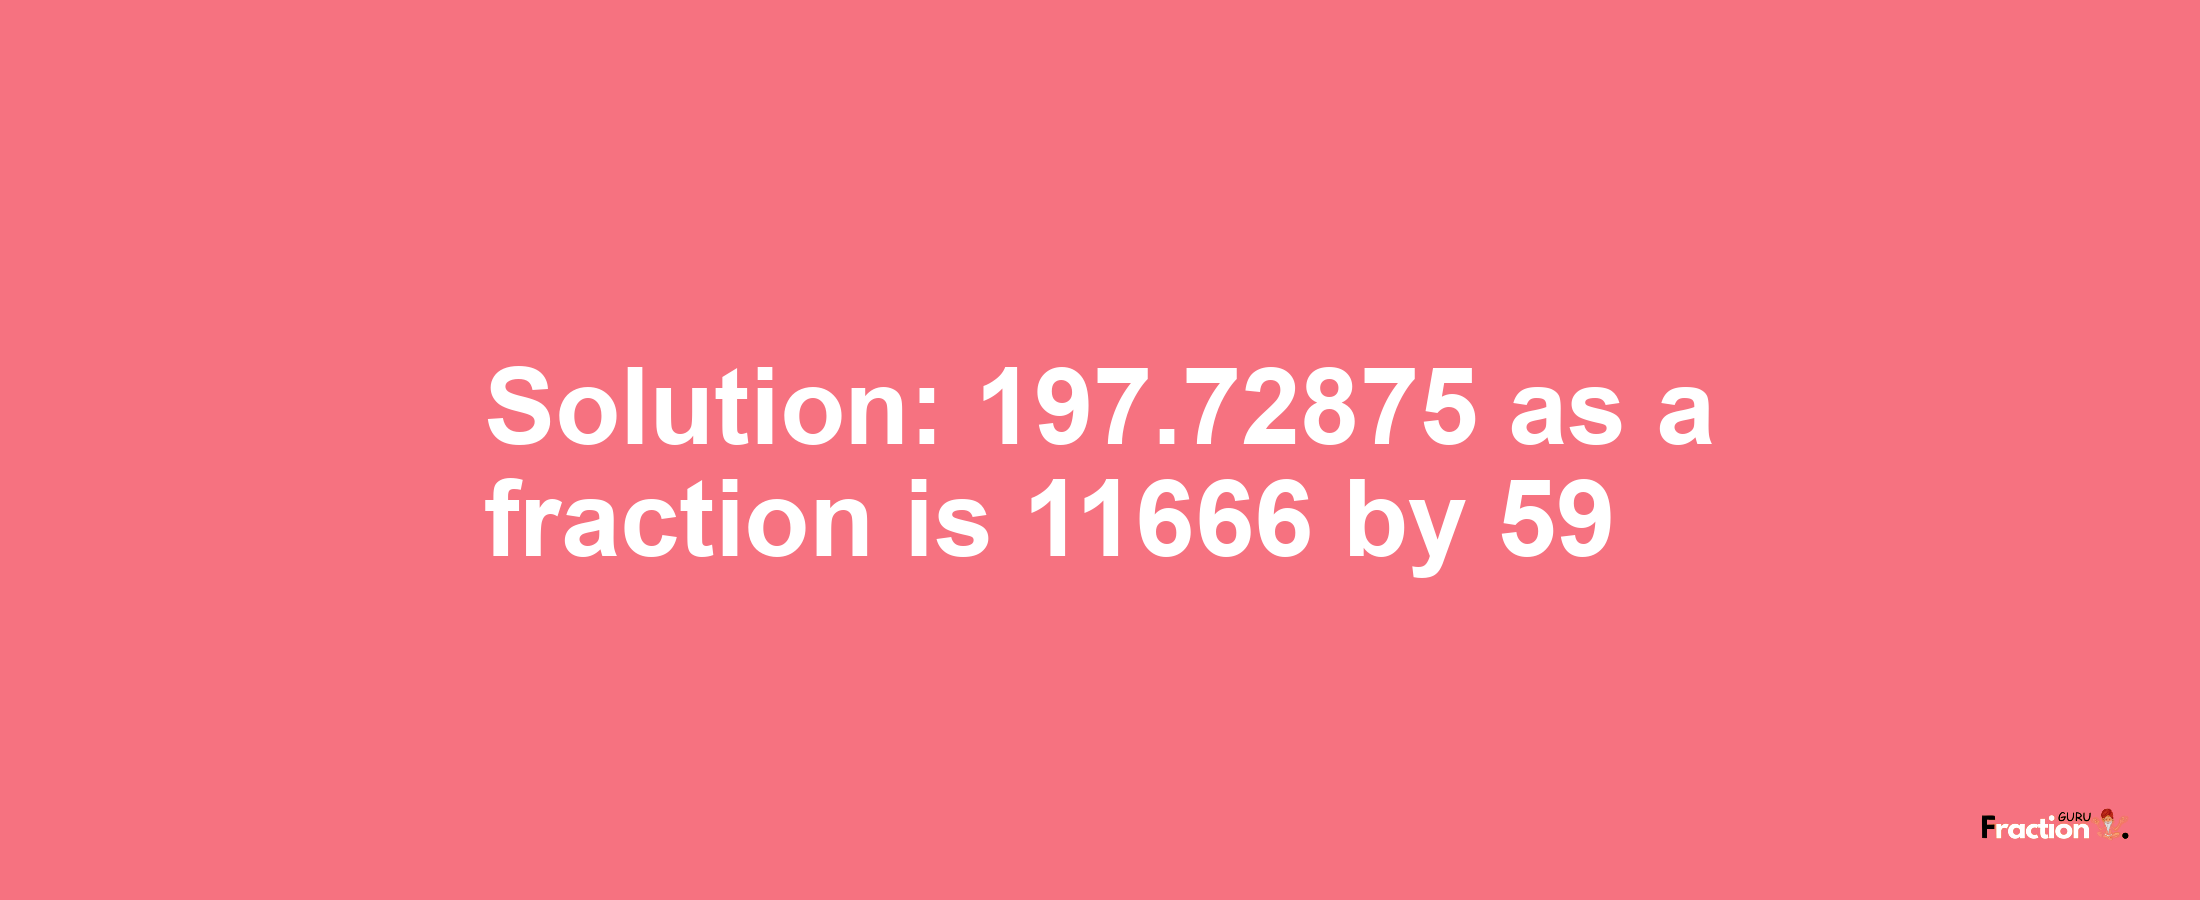 Solution:197.72875 as a fraction is 11666/59